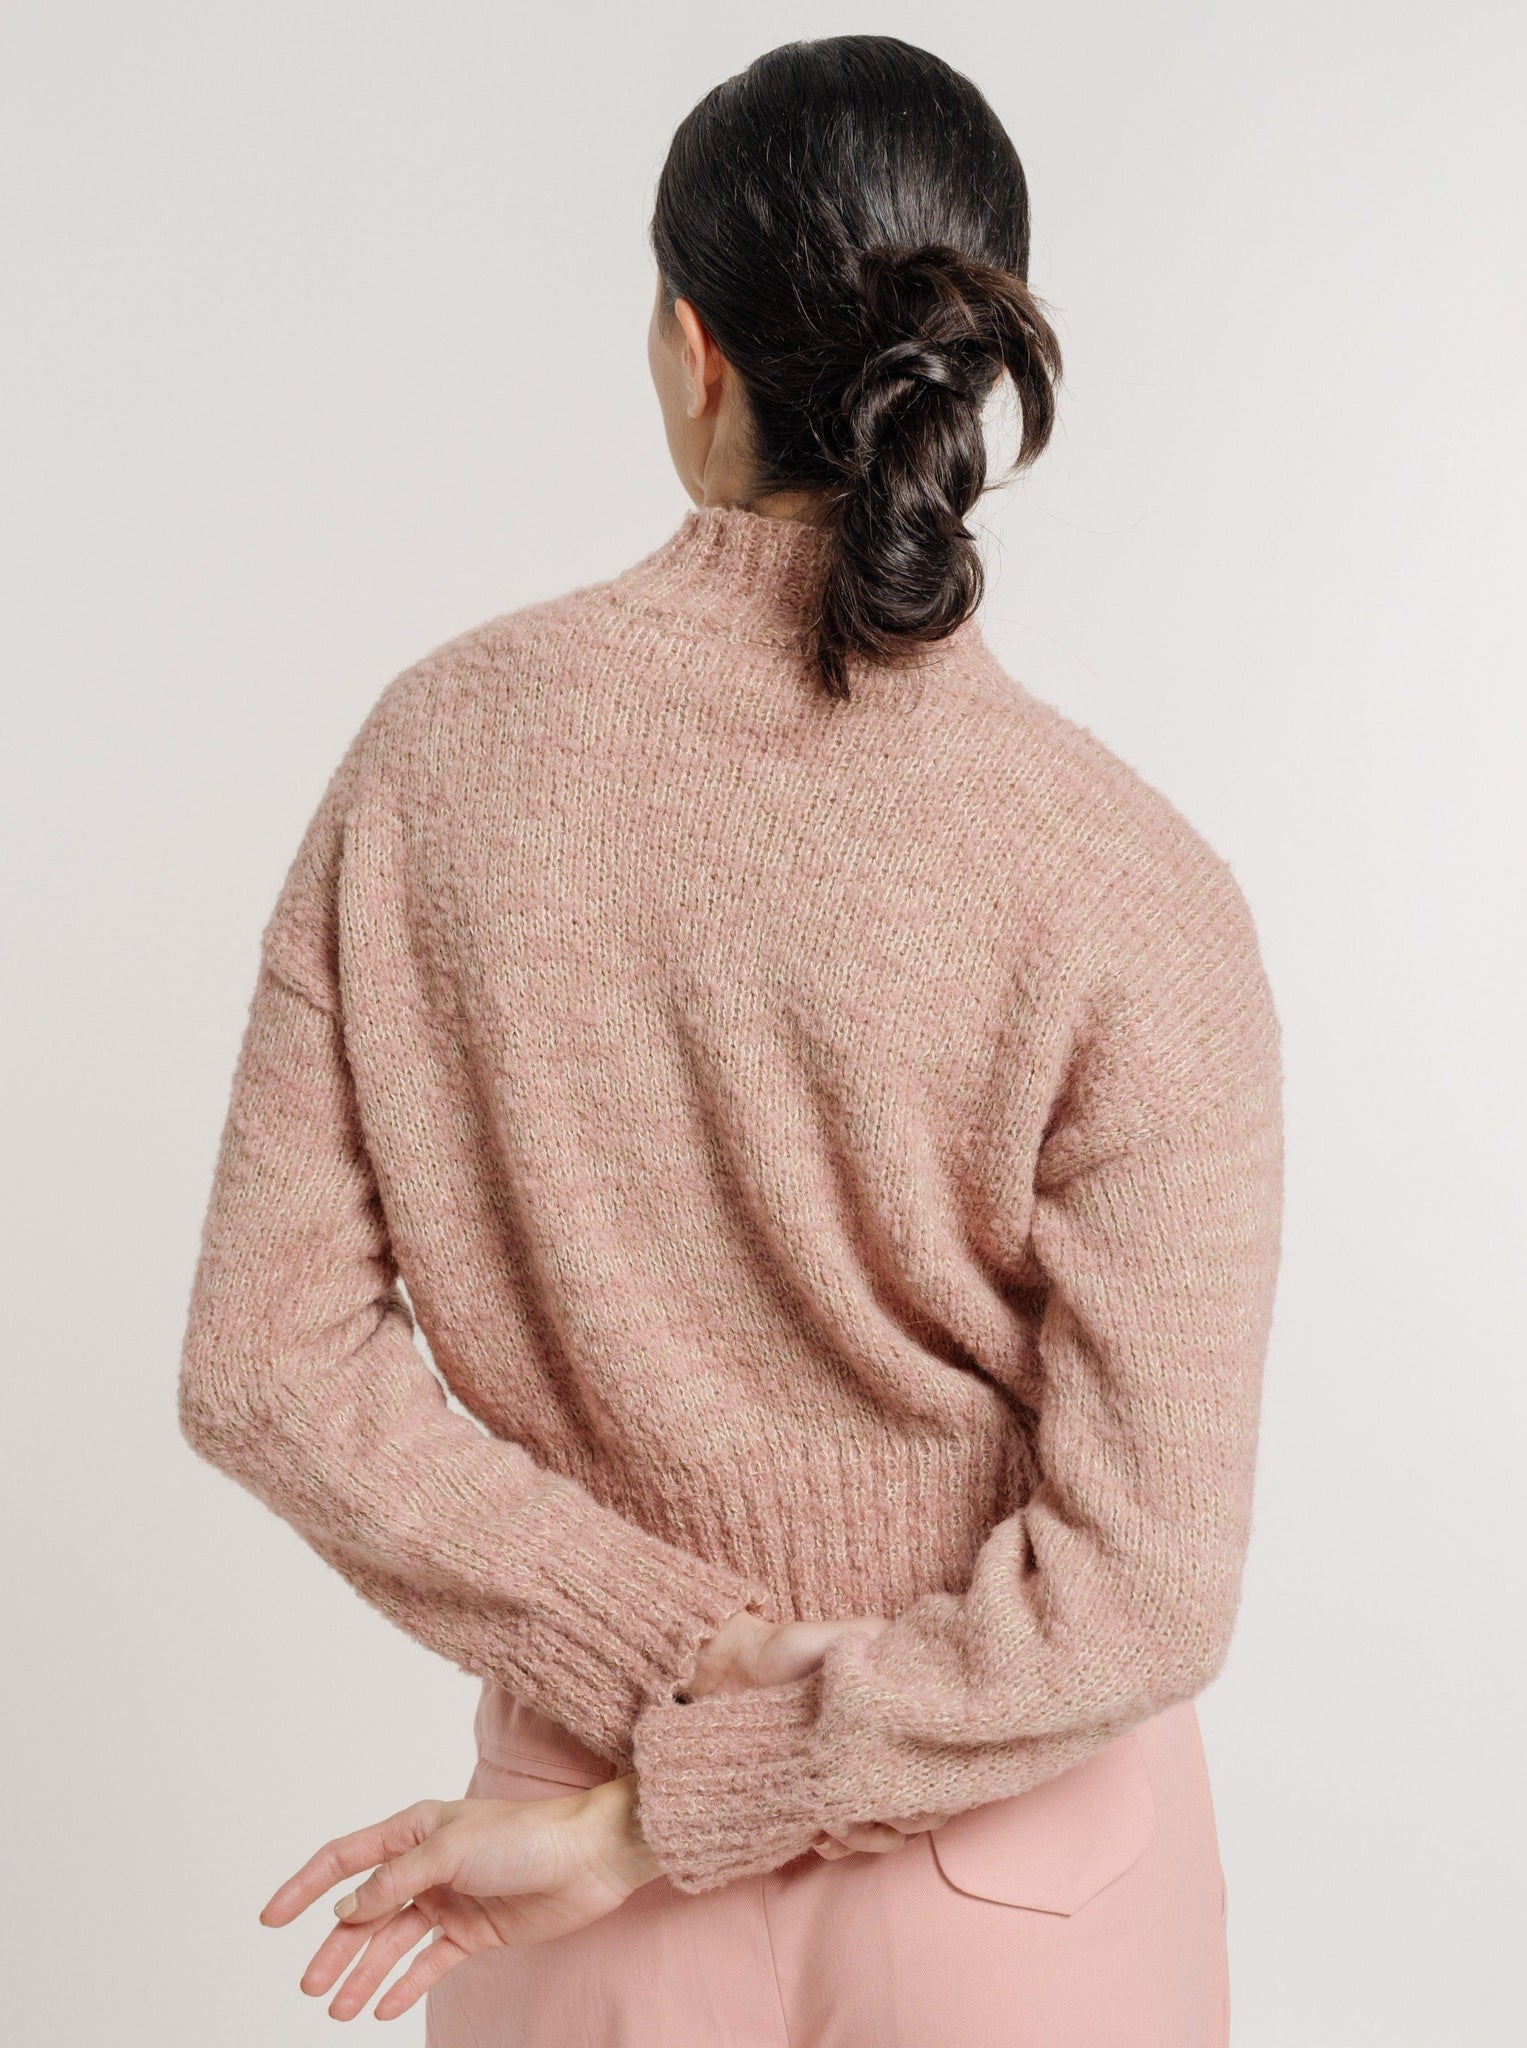 The back view of a woman wearing cozy high-waisted pants and the Claudia Sweater - Pincusion Pink.